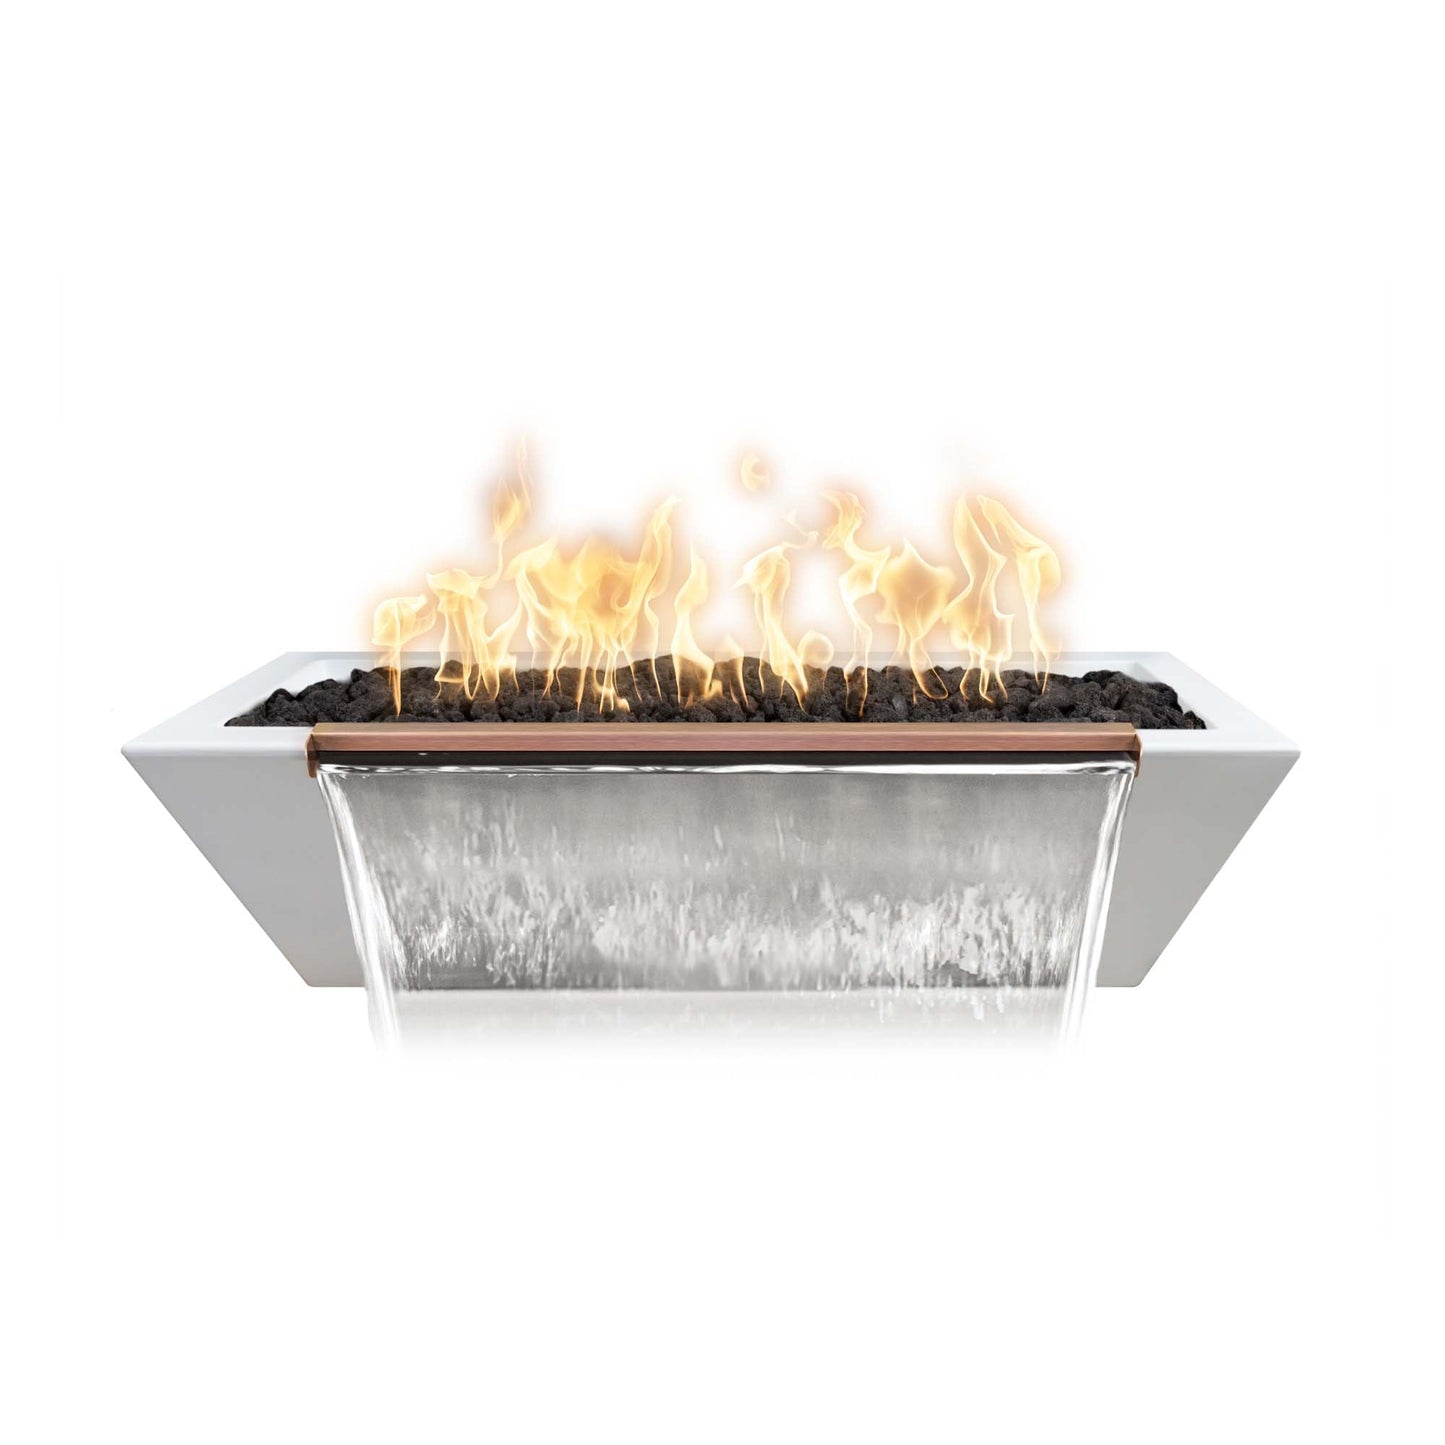 The Outdoor Plus Linear Maya 72" Metallic Slate GFRC Concrete Natural Gas Fire & Water Bowl with 12V Electronic Ignition